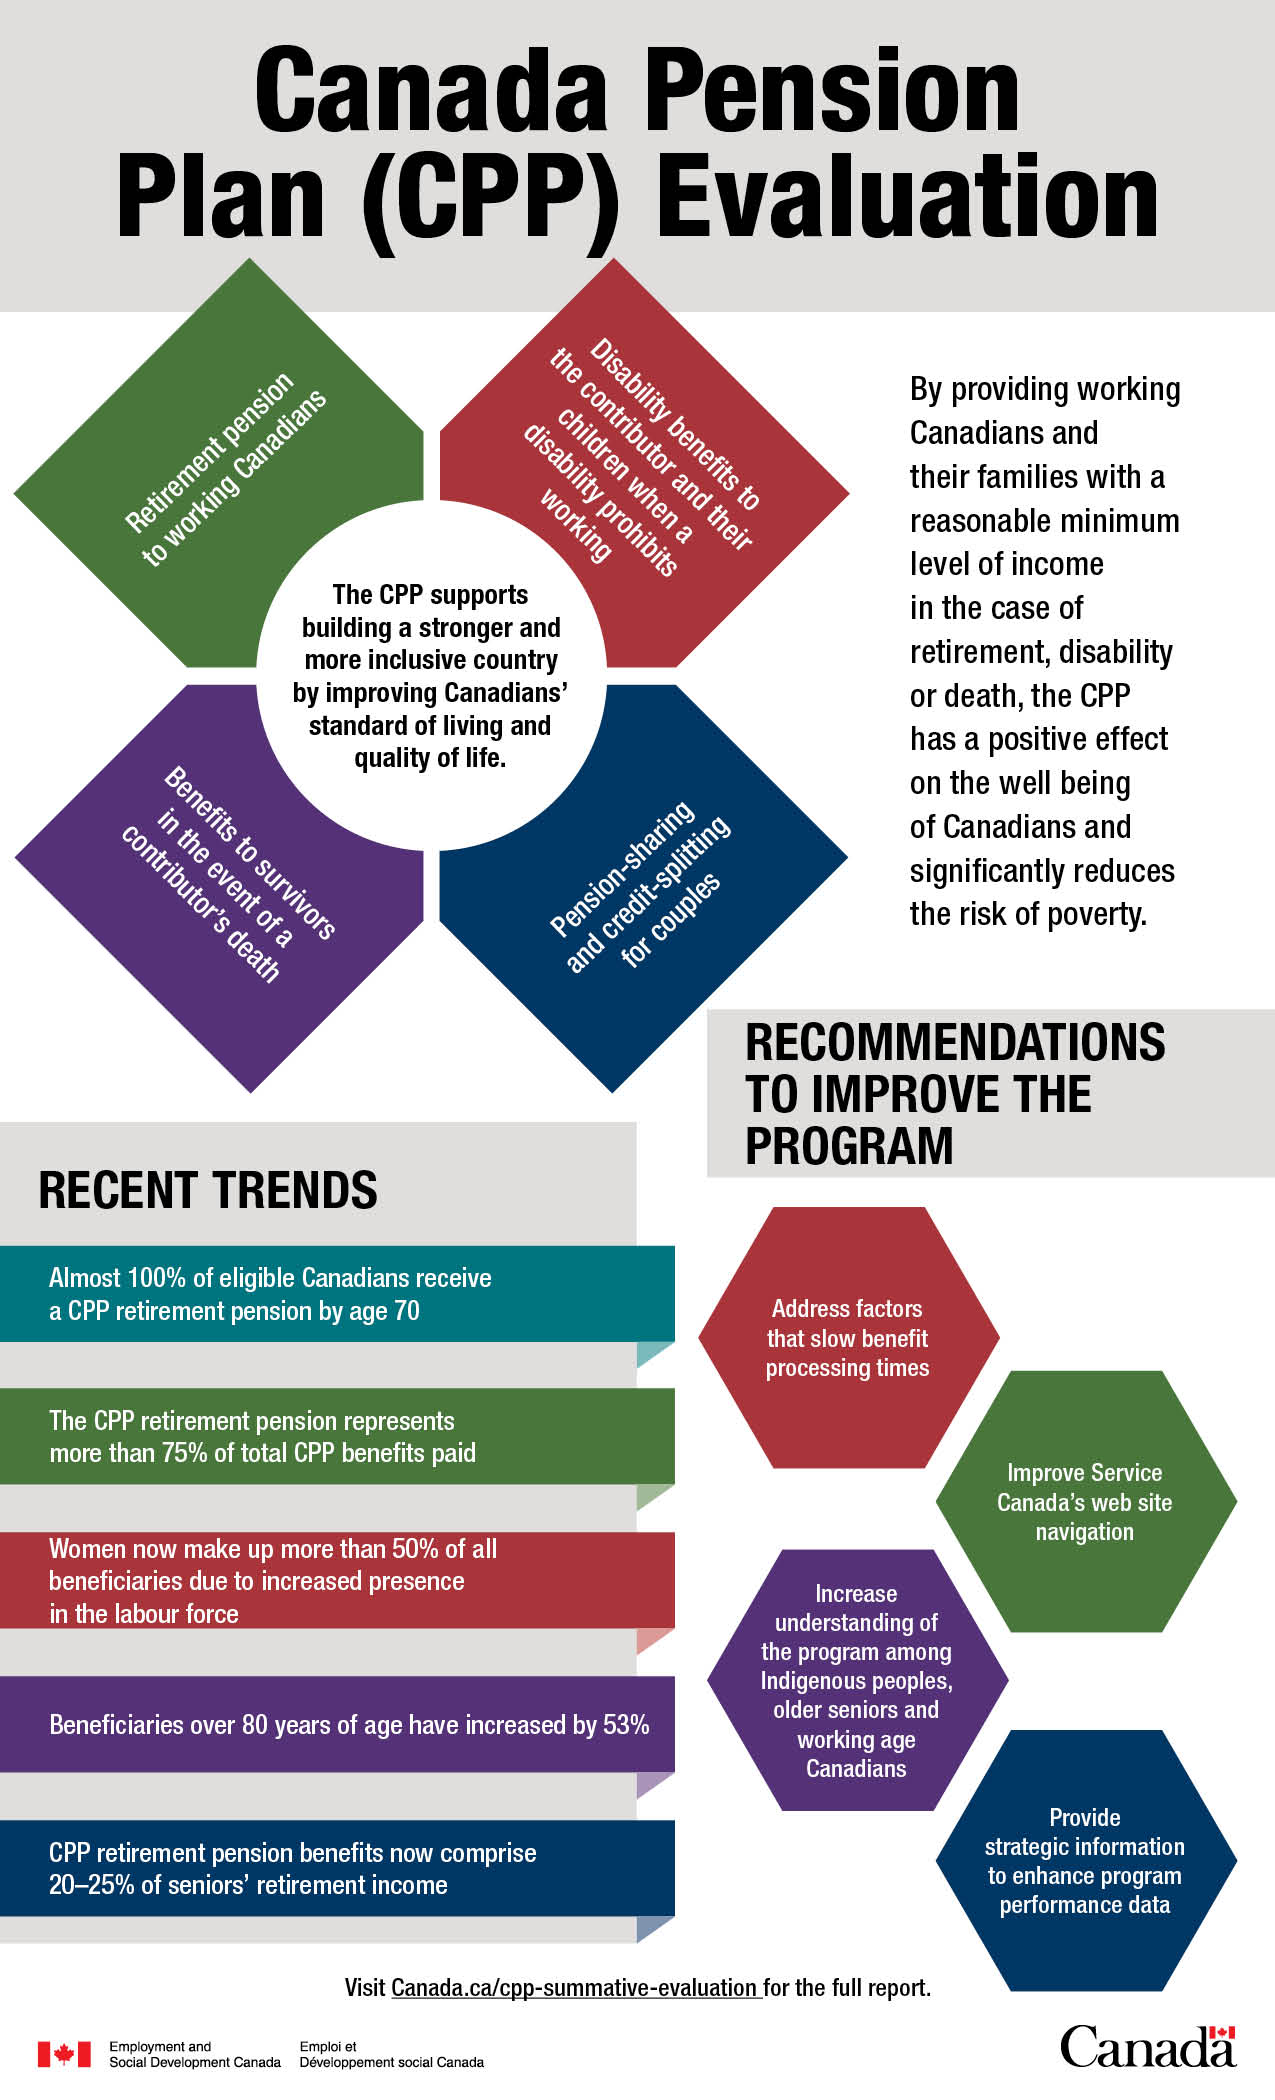 Infographic about Canada Pension Plan (CPP) Evaluation. The full description follows the image on this page.